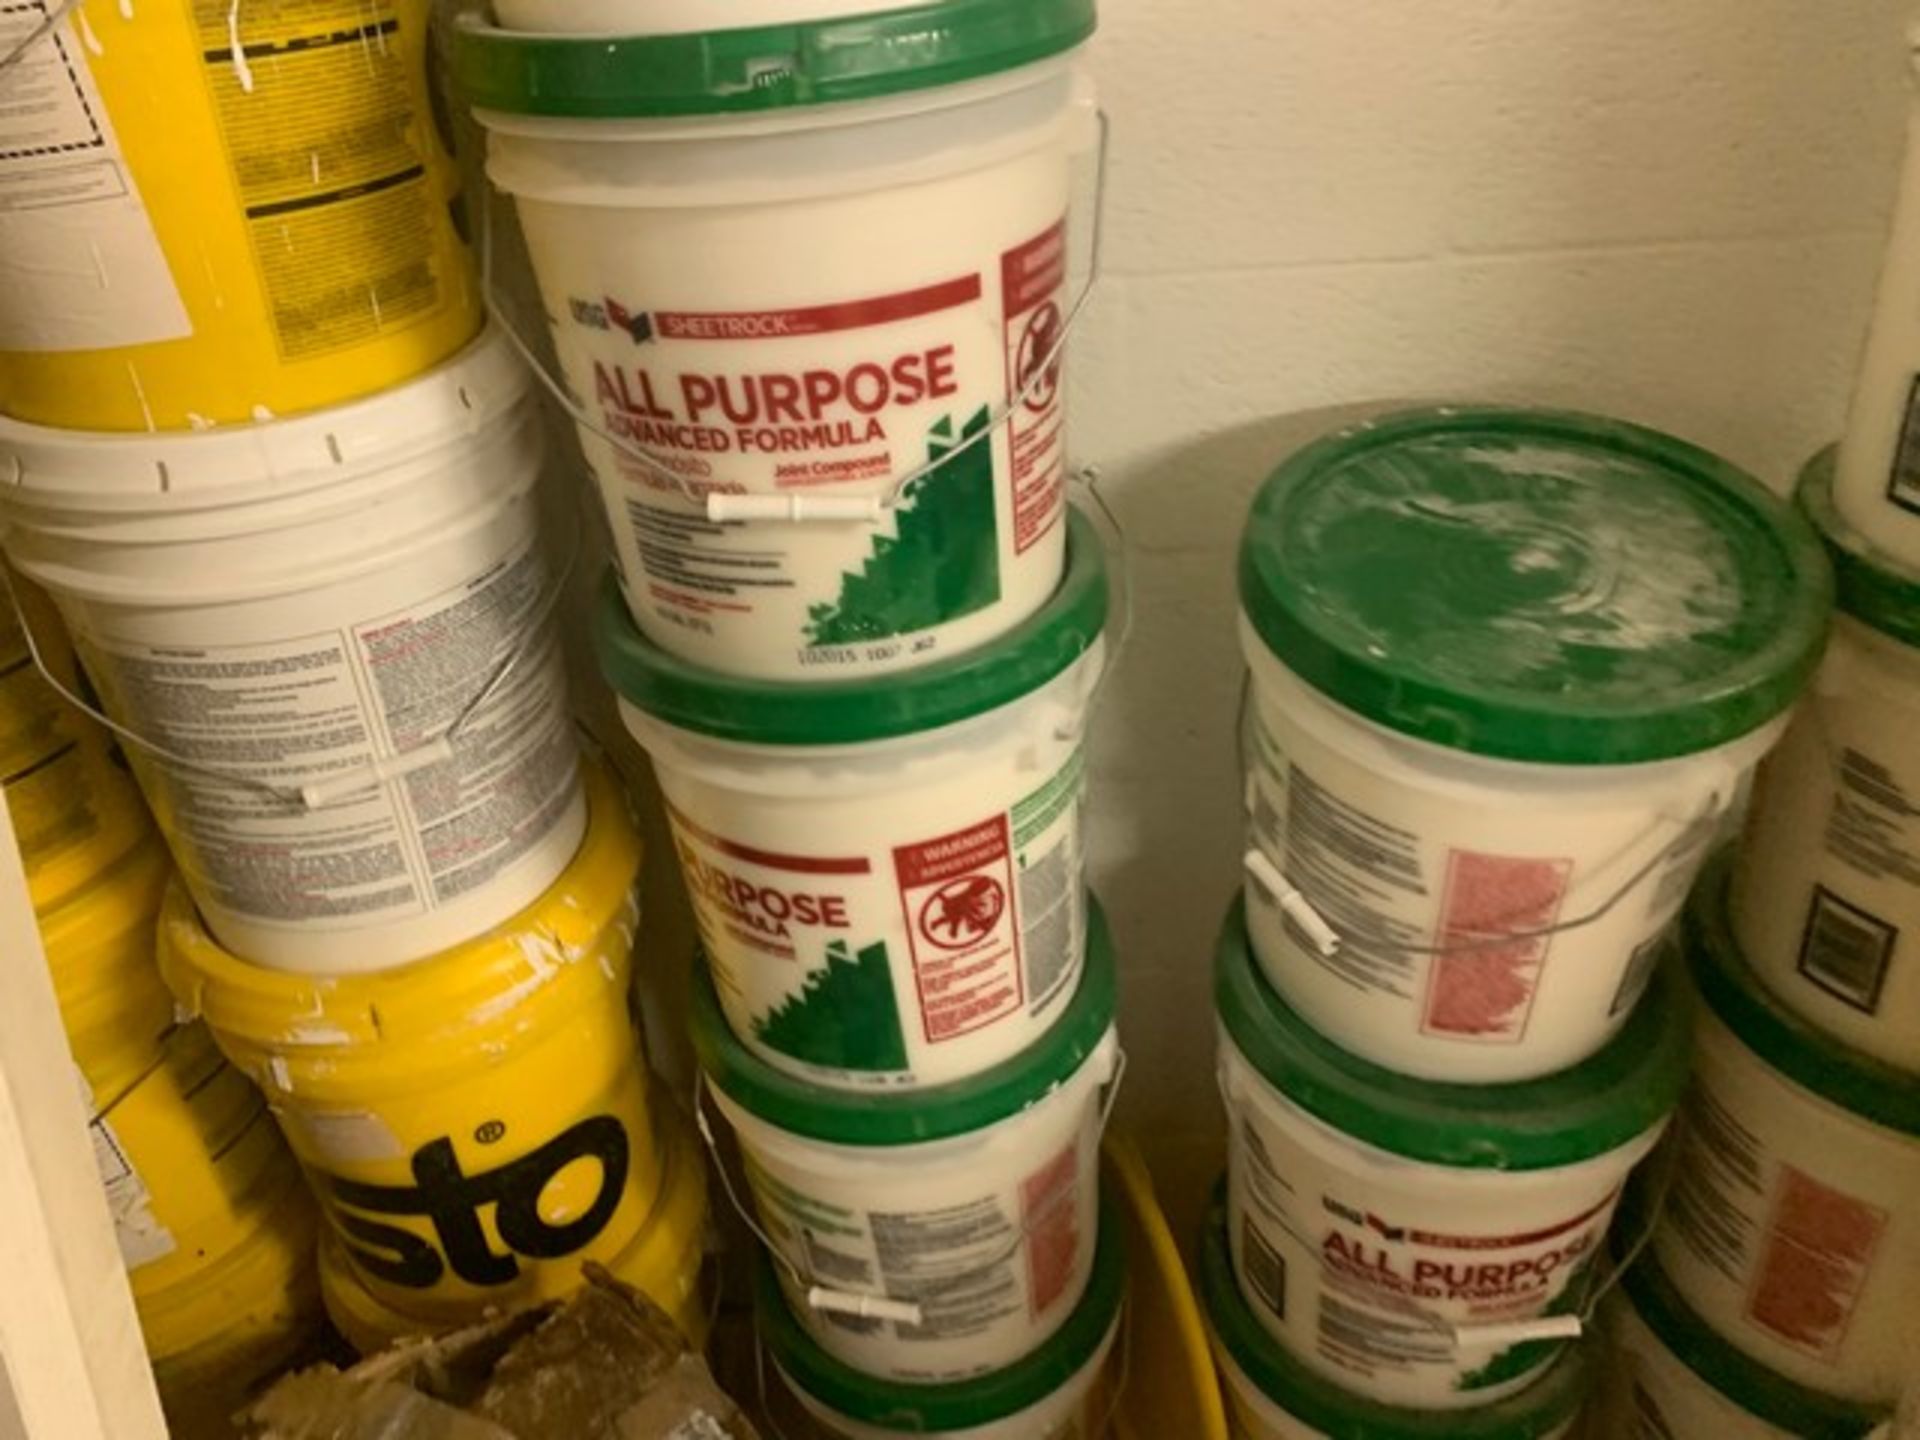 ASSORTED 5 GALLON BUCKETS - LIQUID RUBBER, JOINT COMPOUND, ACRYL PLUS, COATING, ETC (ON LOFT) - Image 2 of 2